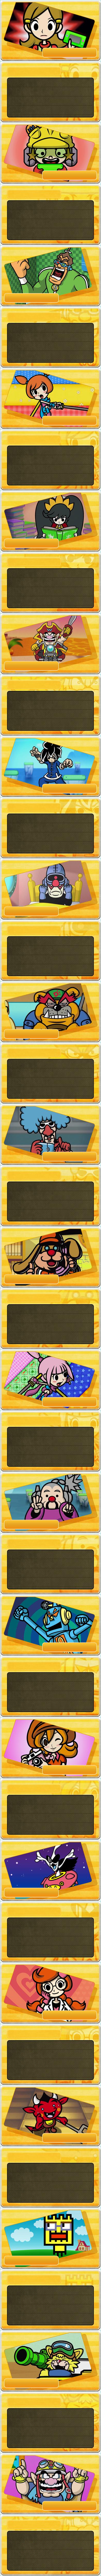 Game & Wario - Character Cards